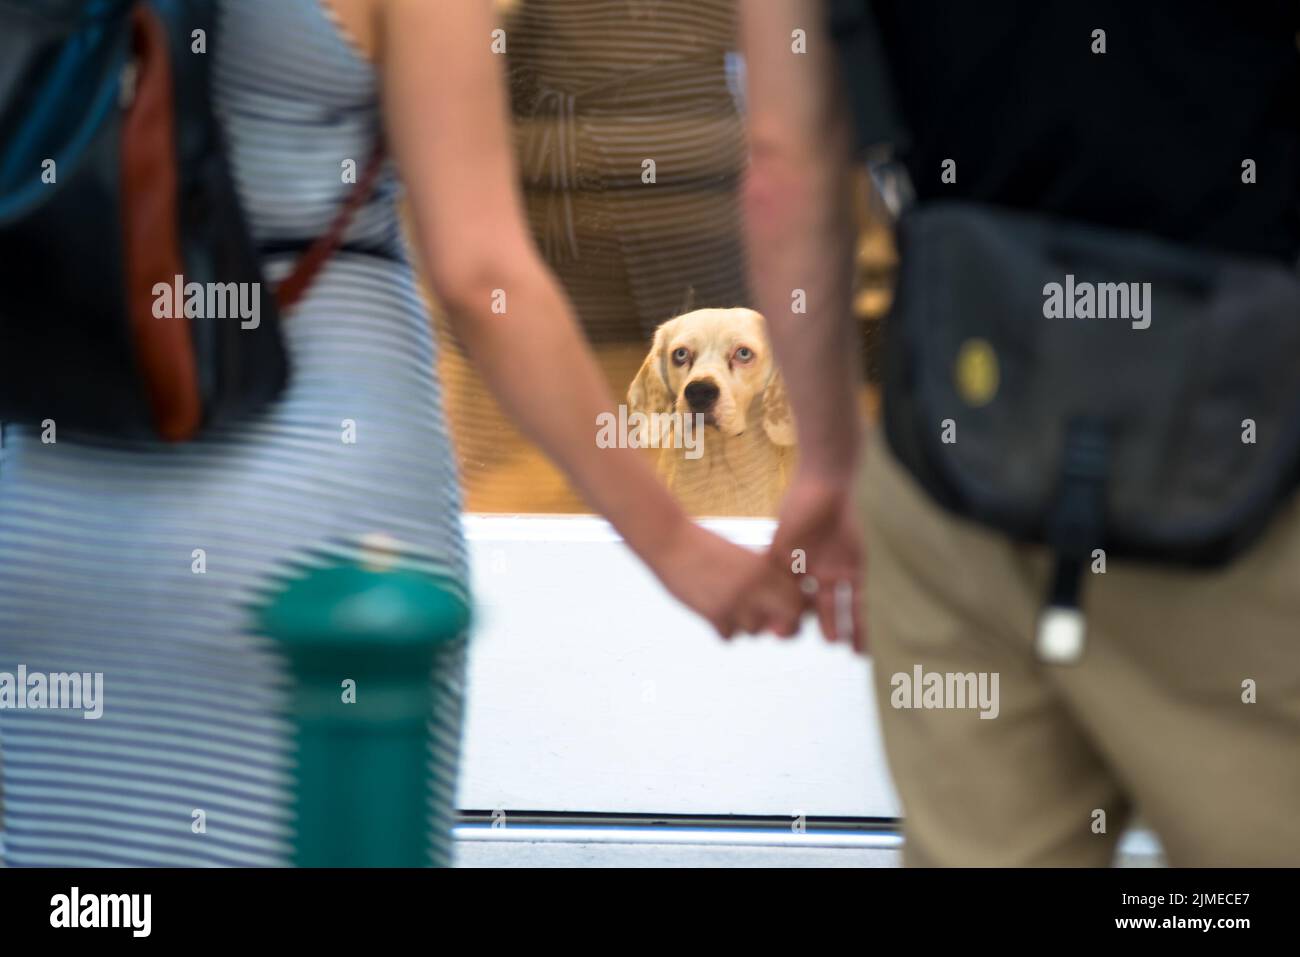 Dog looking at couple holding hangs from behind glass door Stock Photo